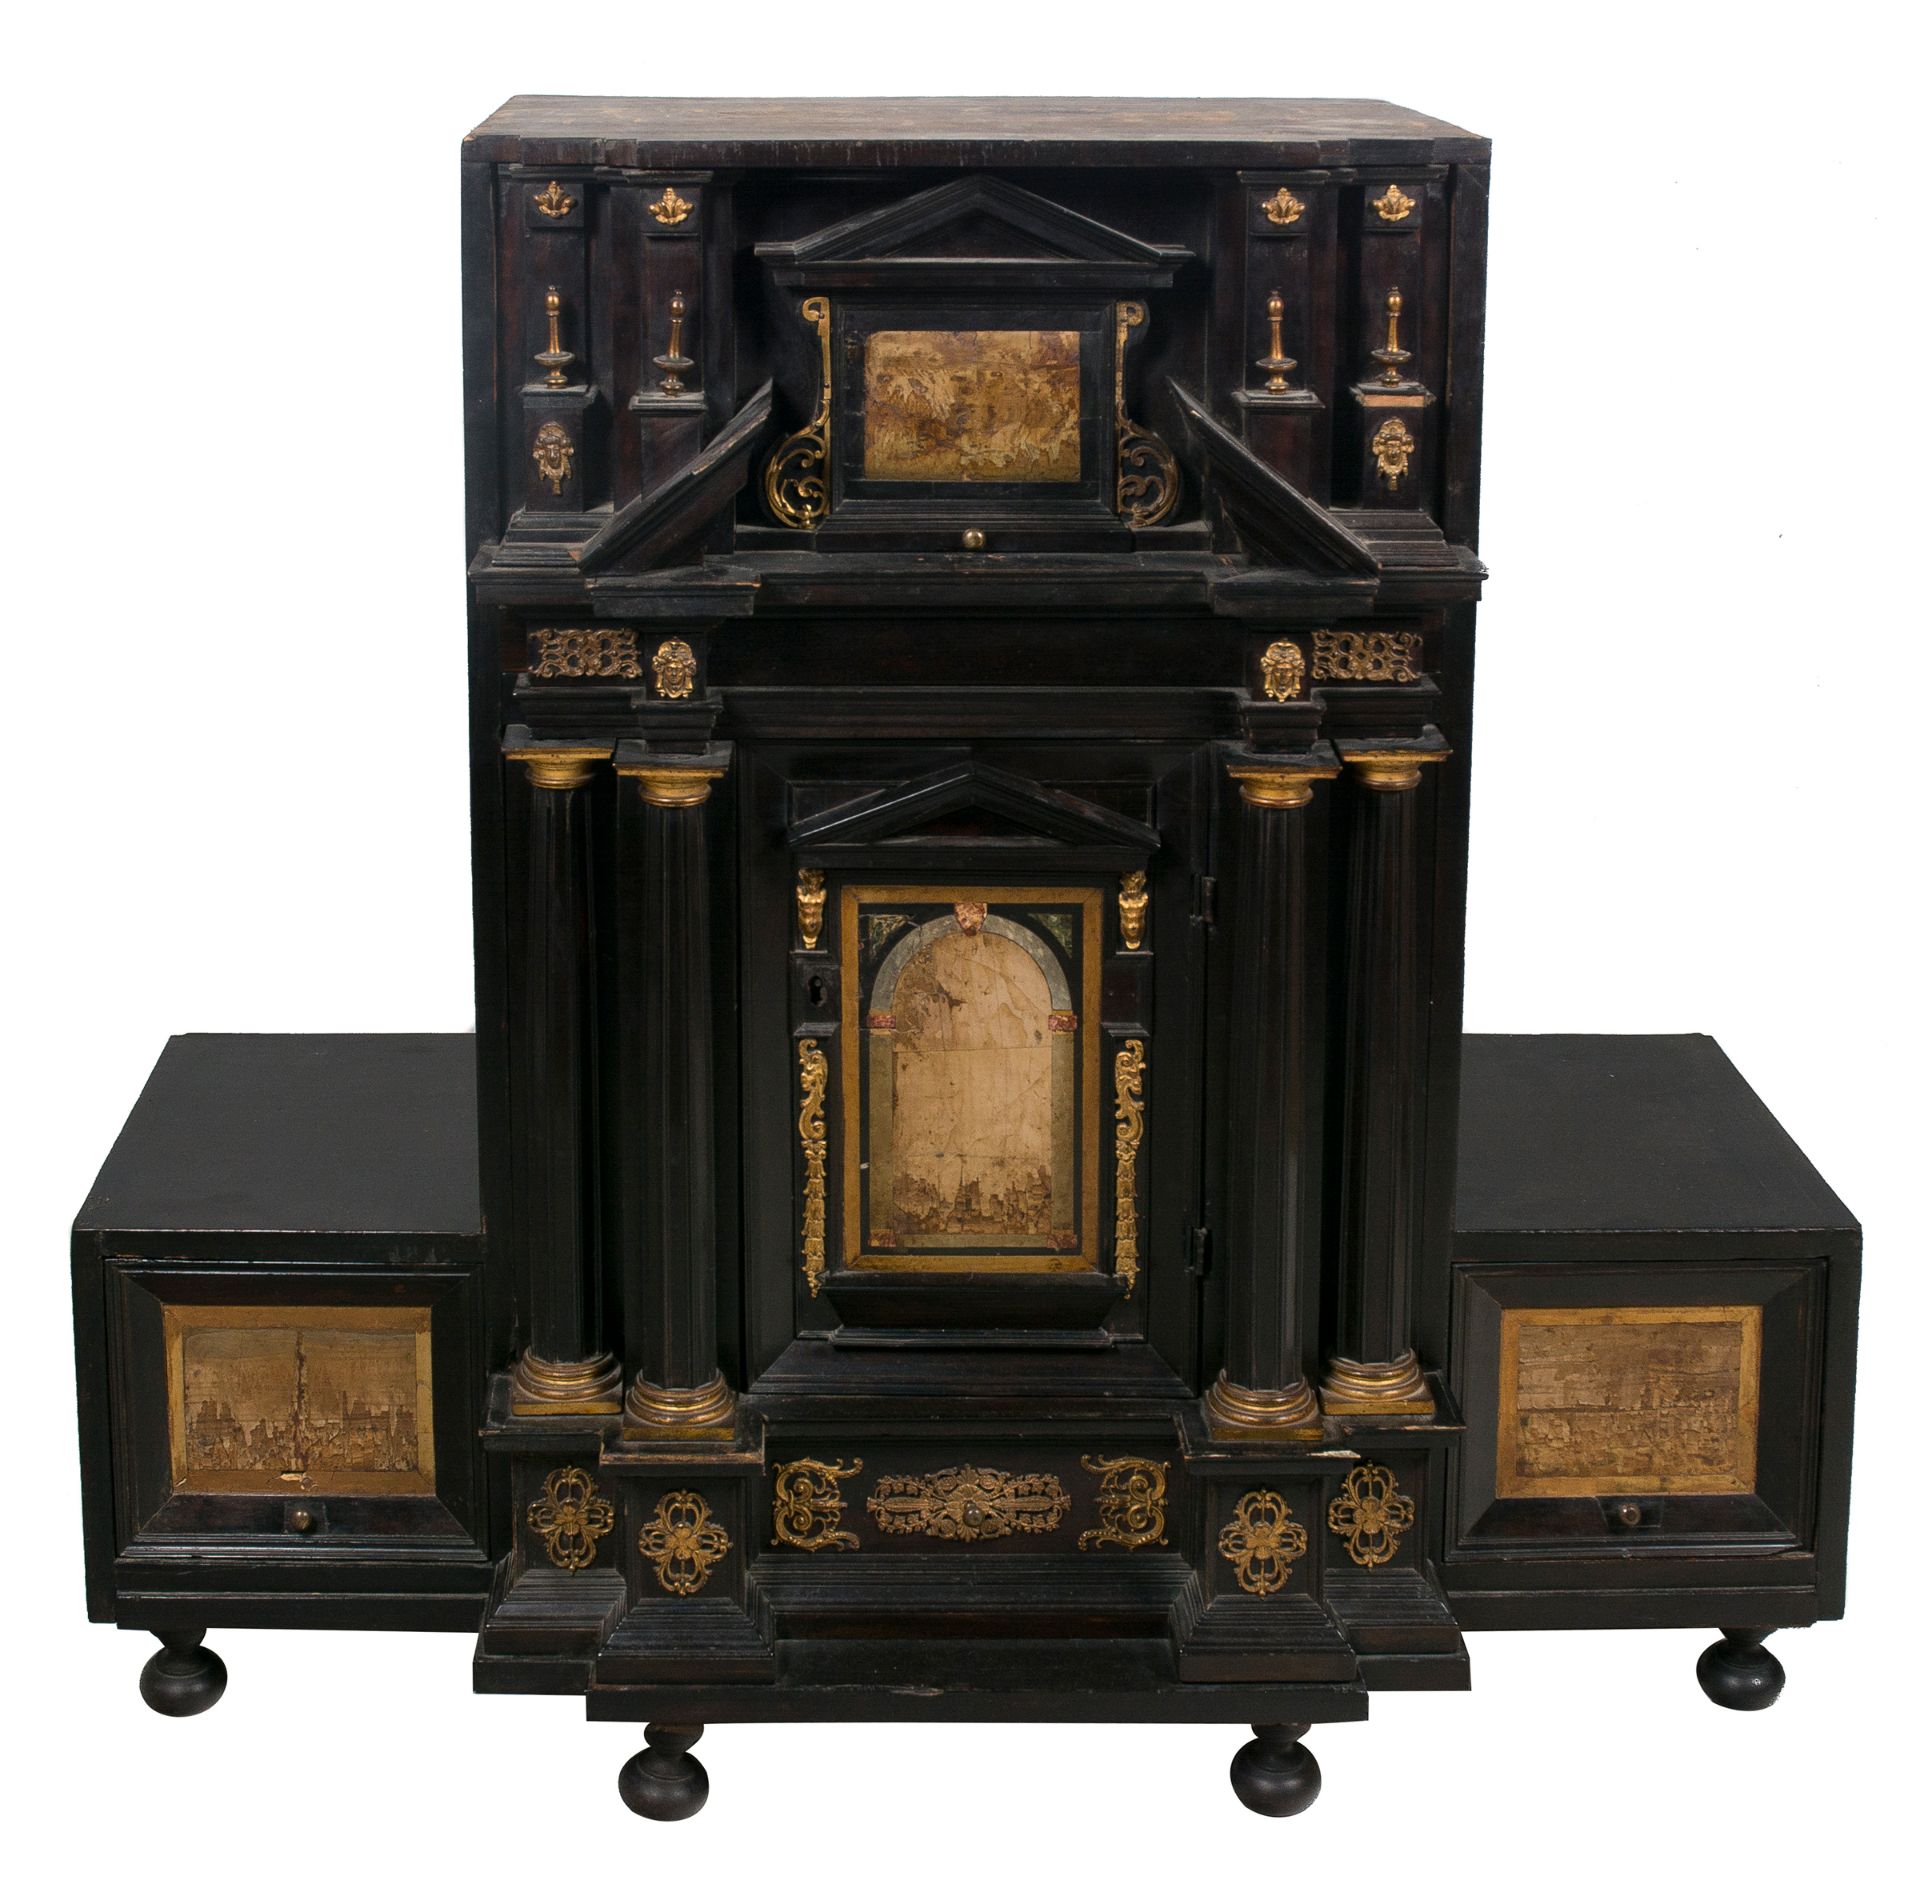 Ebony, gilded bronze and ivory cabinet. Flanders or Italy. 17th century.